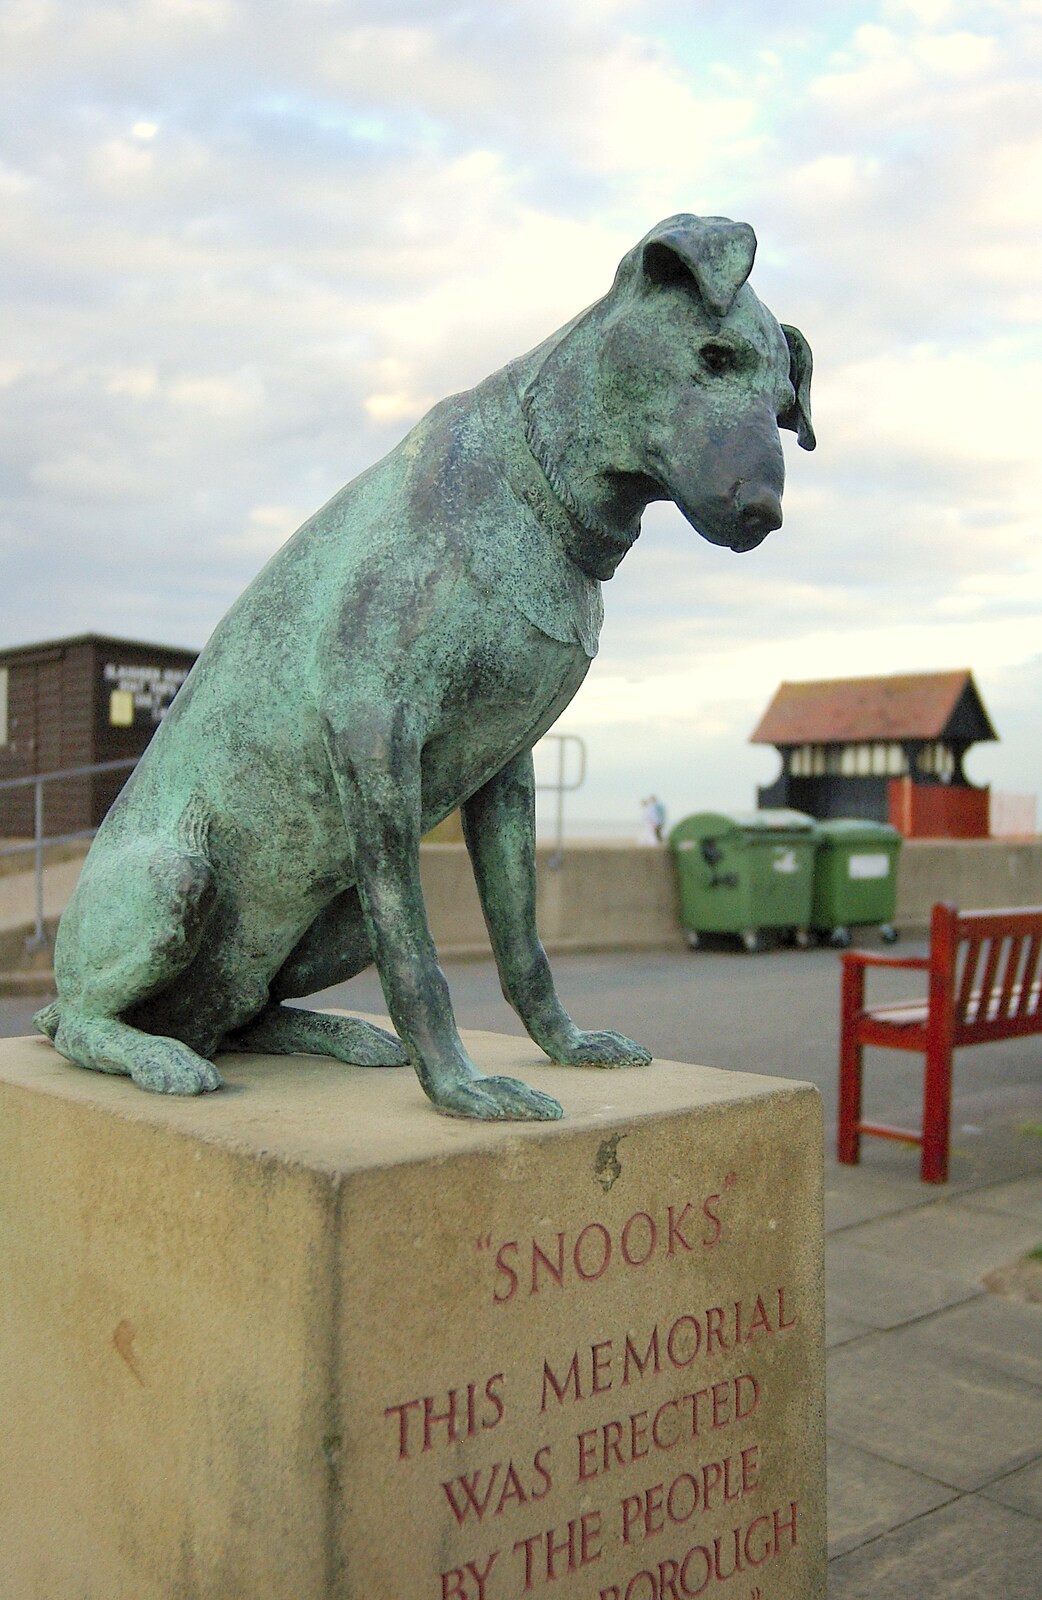 A bronze statue of Snooks, the HMV-alike dog from The Regatta Restaurant with Mother and Mike, Aldeburgh, Suffolk - 10th August 2006